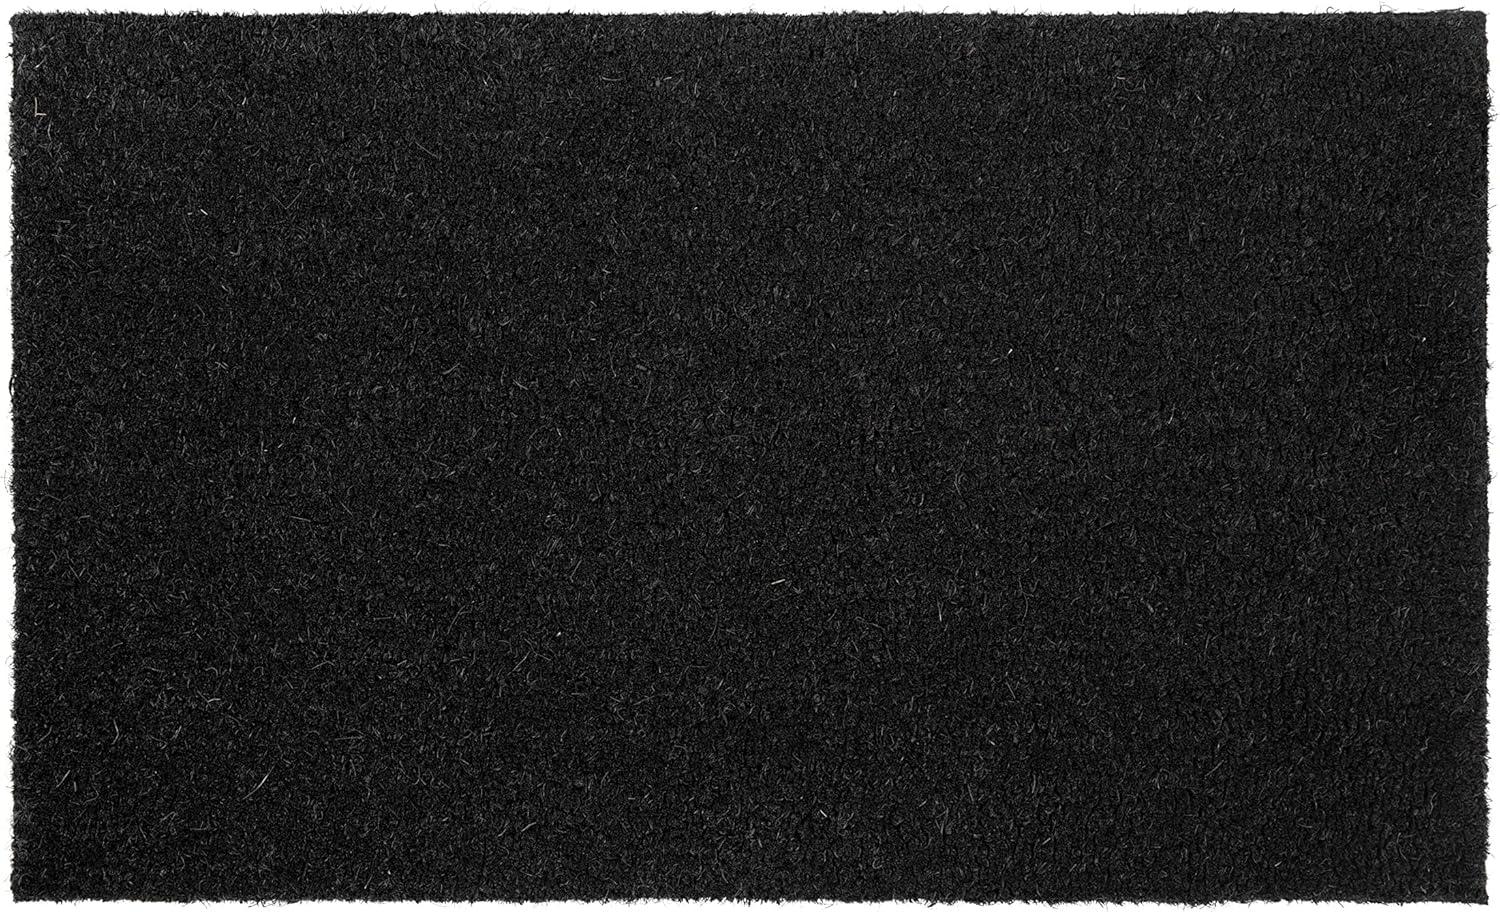 Solid Black Natural Coir 18" x 30" Outdoor Doormat with Non-Slip Backing